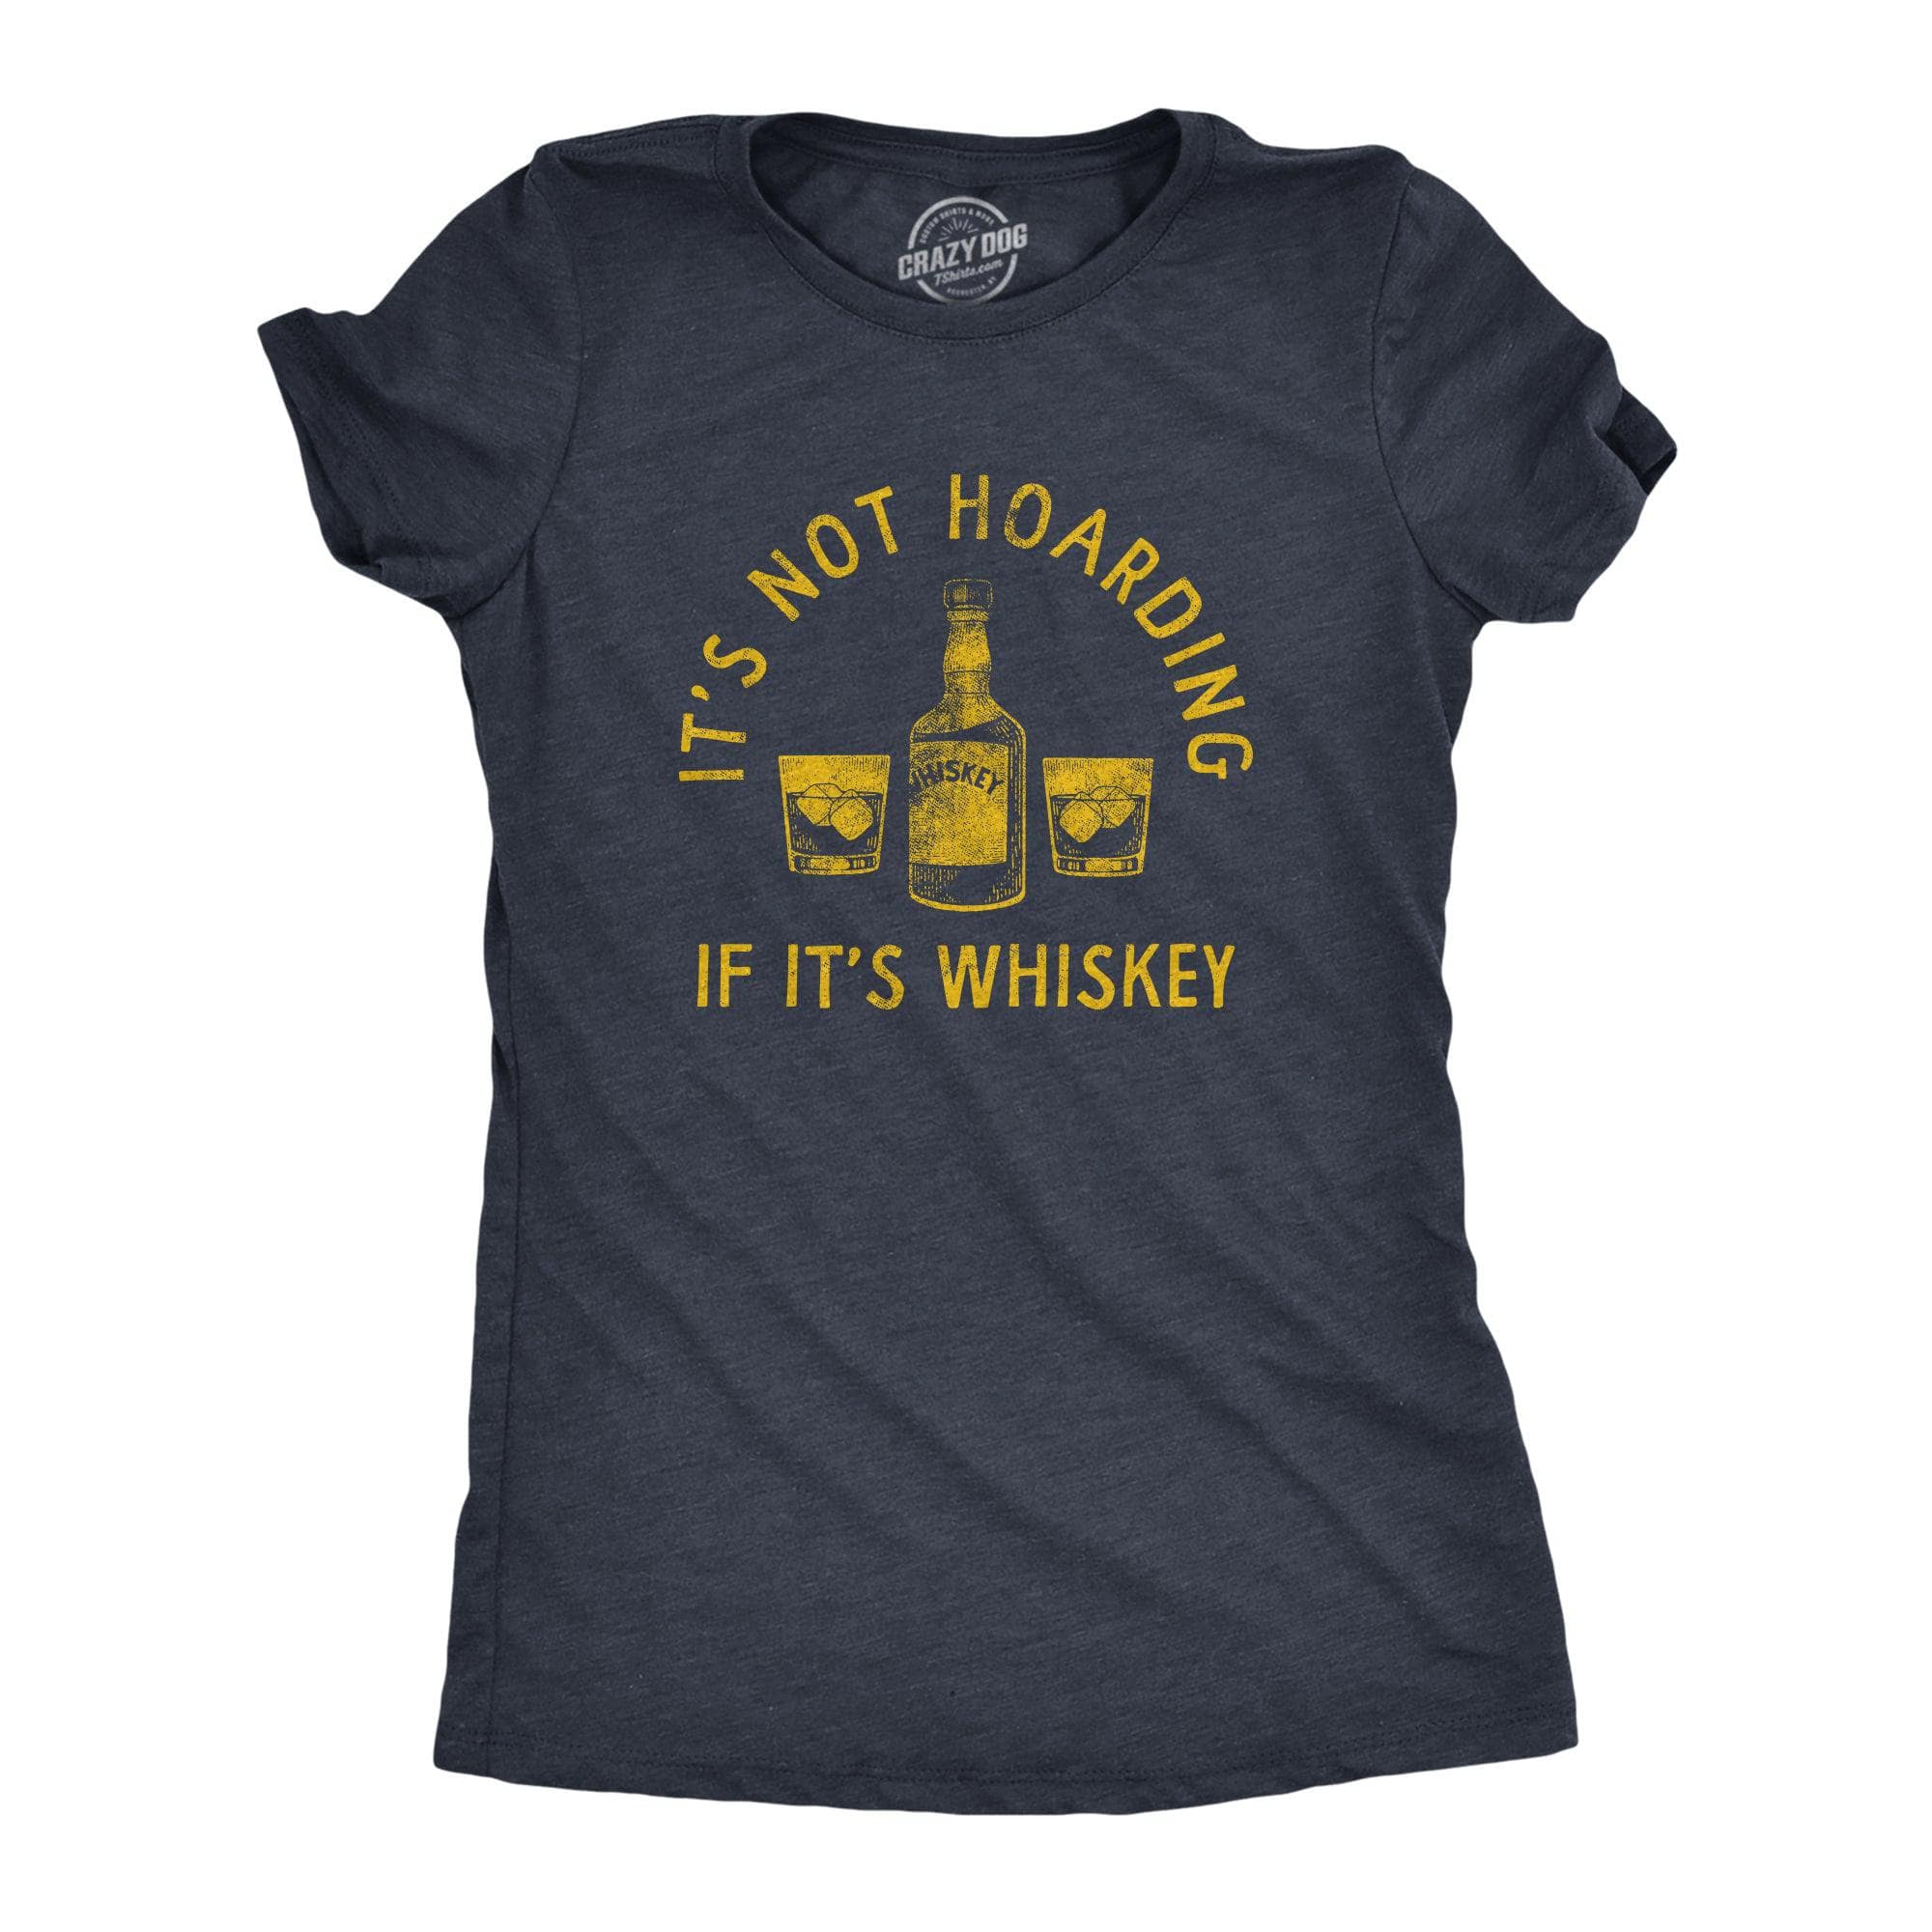 Its Not Hoarding If Its Whiskey Women's Tshirt  -  Crazy Dog T-Shirts